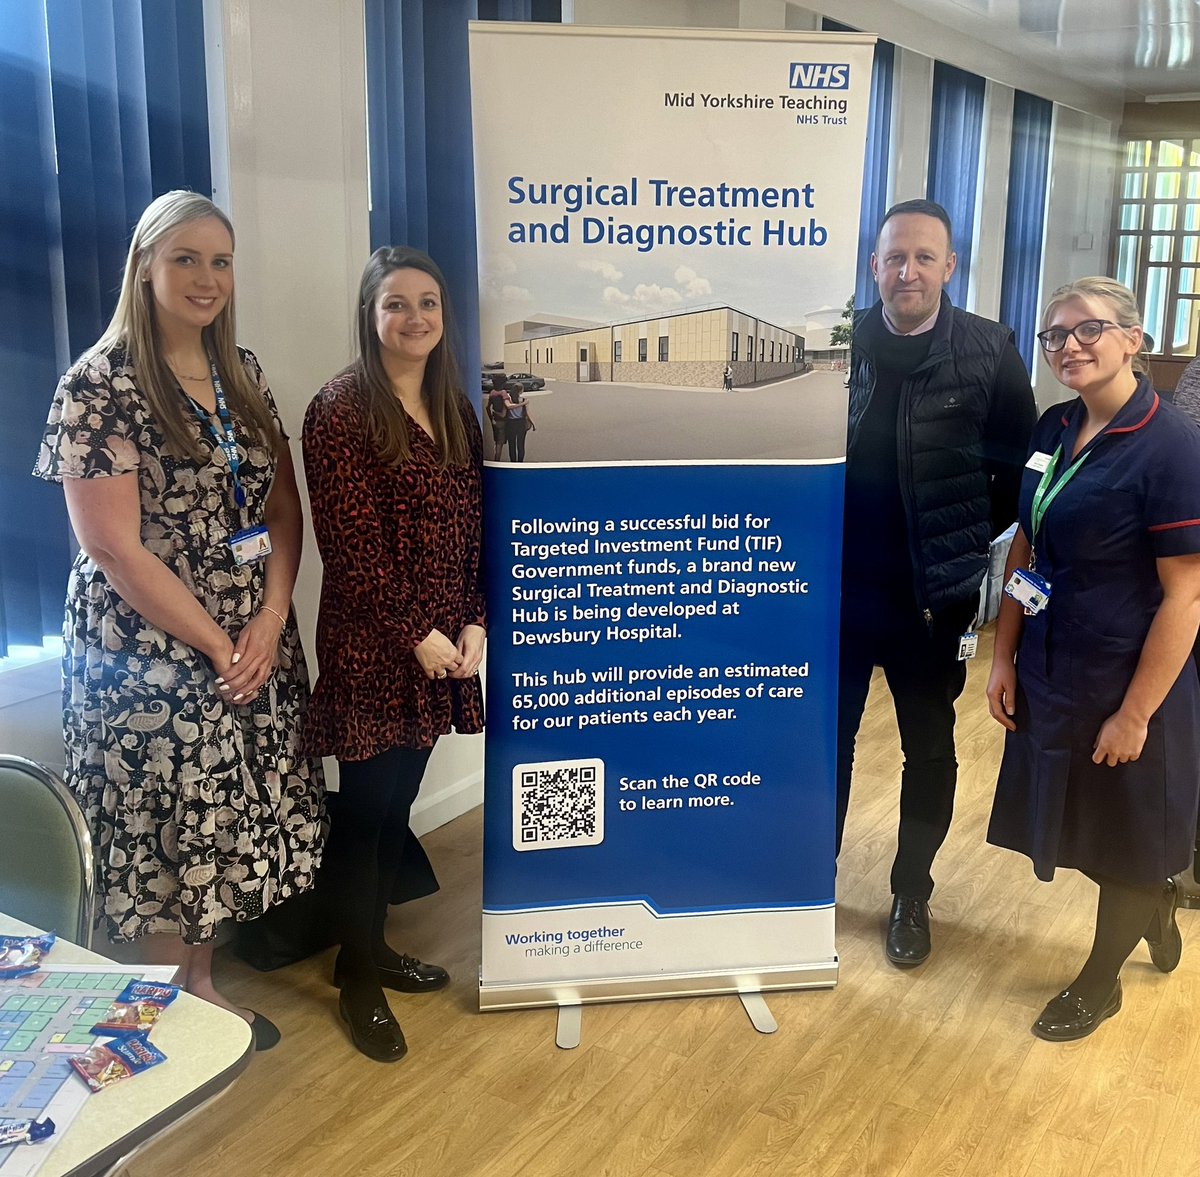 Myself, Lucy & Catherine from the project team and Paul from estates are in the Canteen. We’ve got sweets and chocolates! Lots of questions answered already 🏥⚒️ @DosMyht @RebeccaSaville4 @richmct @Miss_KeelyR